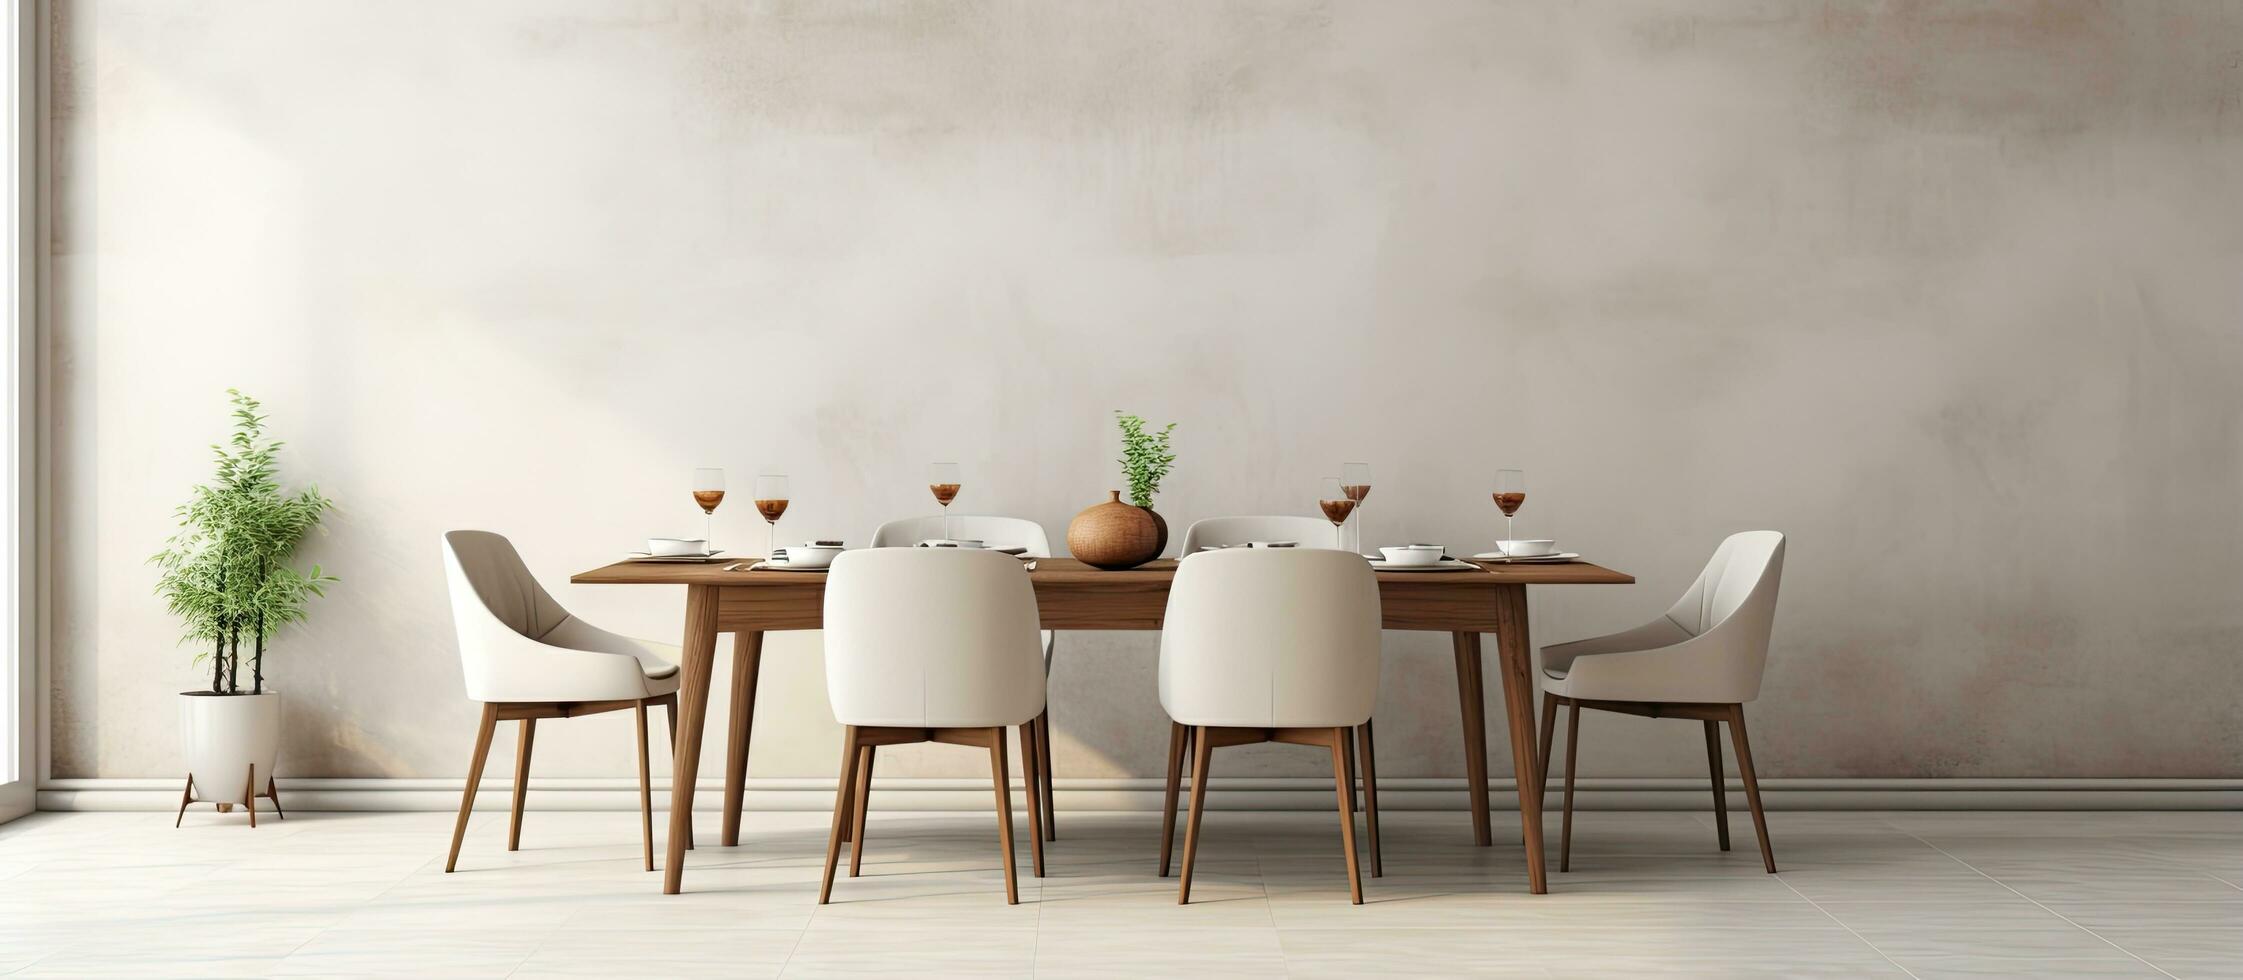 a white dining room with concrete floors patterned walls and a wooden and white table with chairs featuring a poster photo